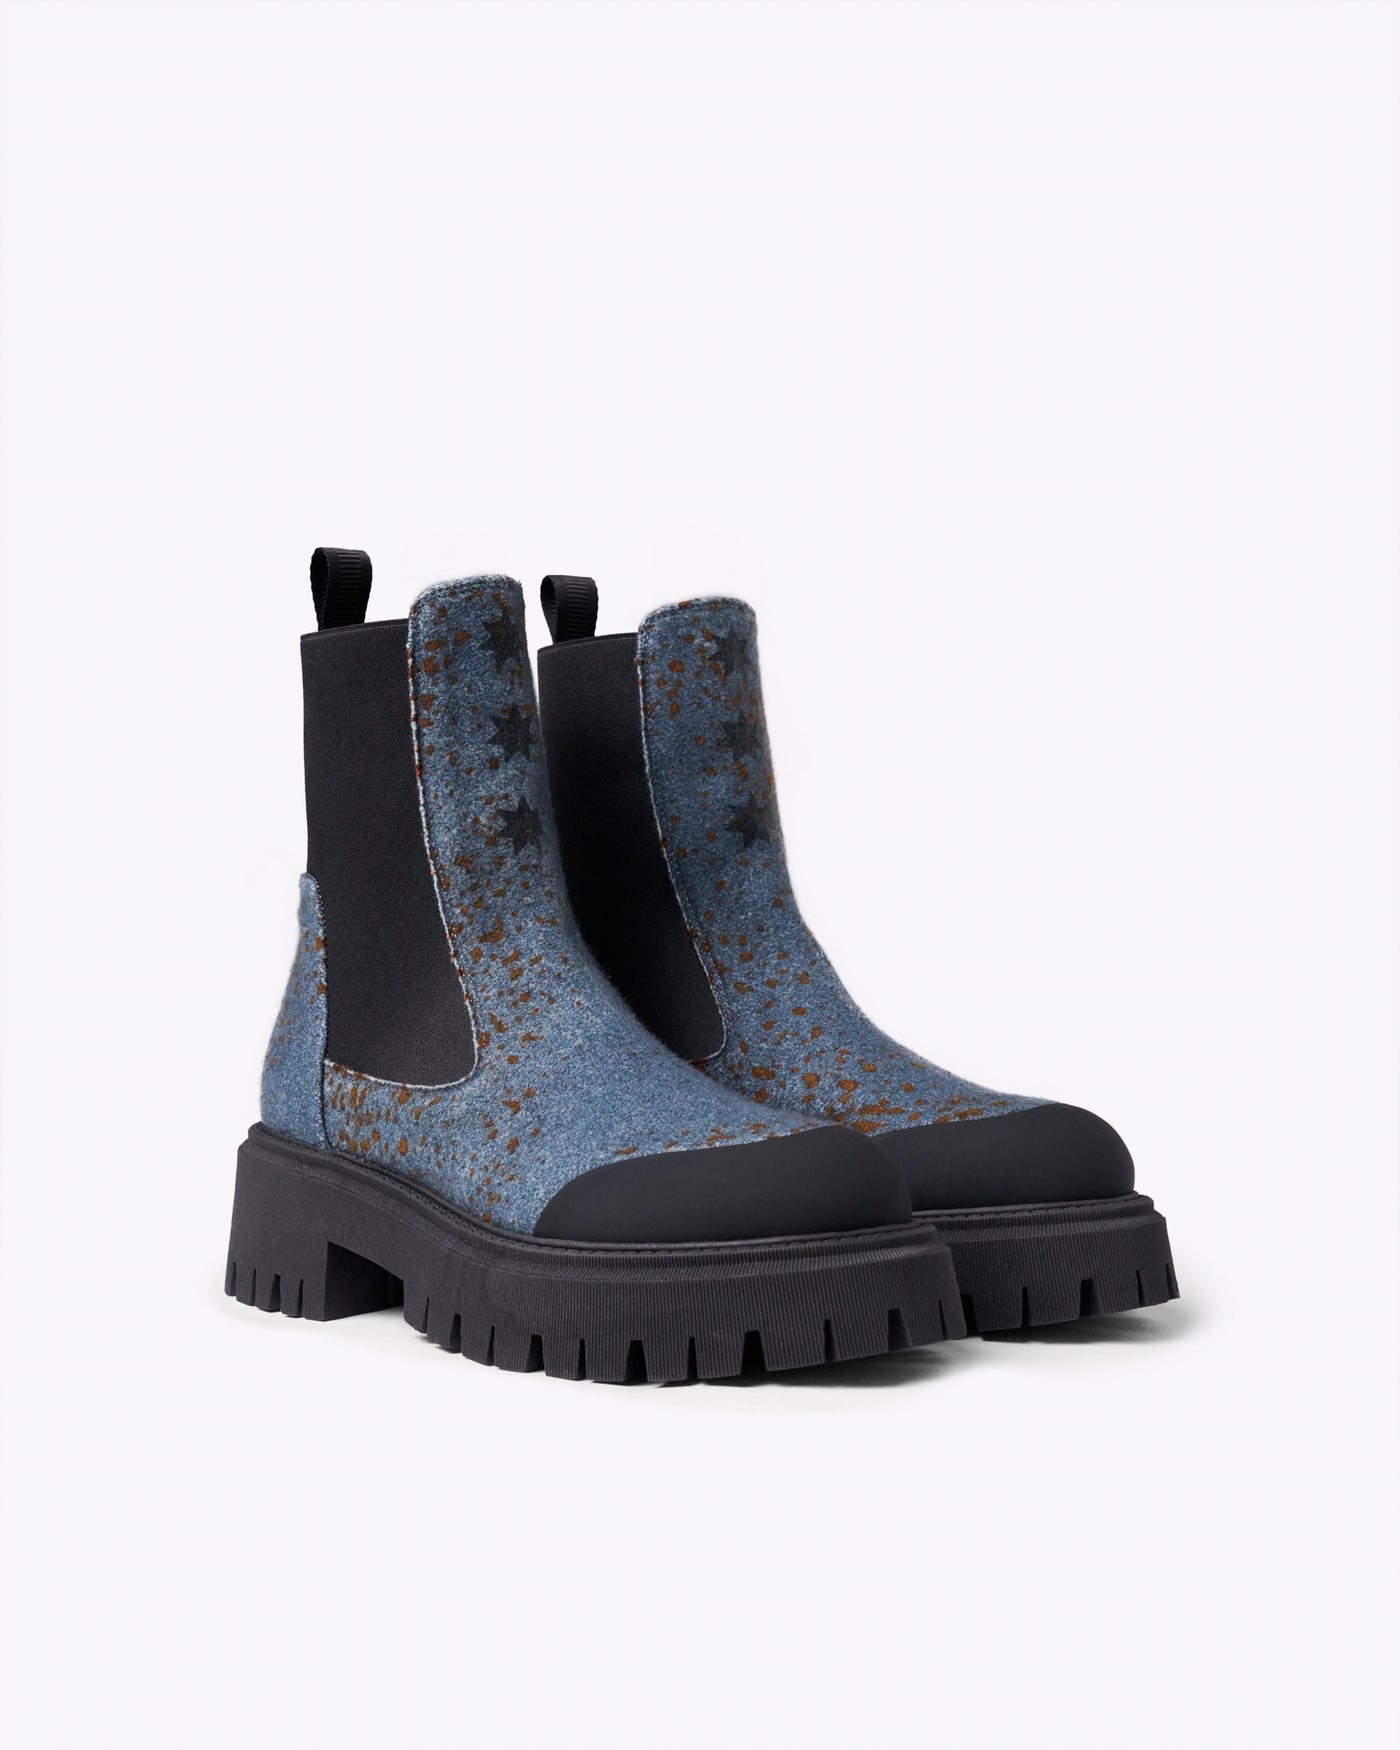 Sparkling Chelsea lake boots